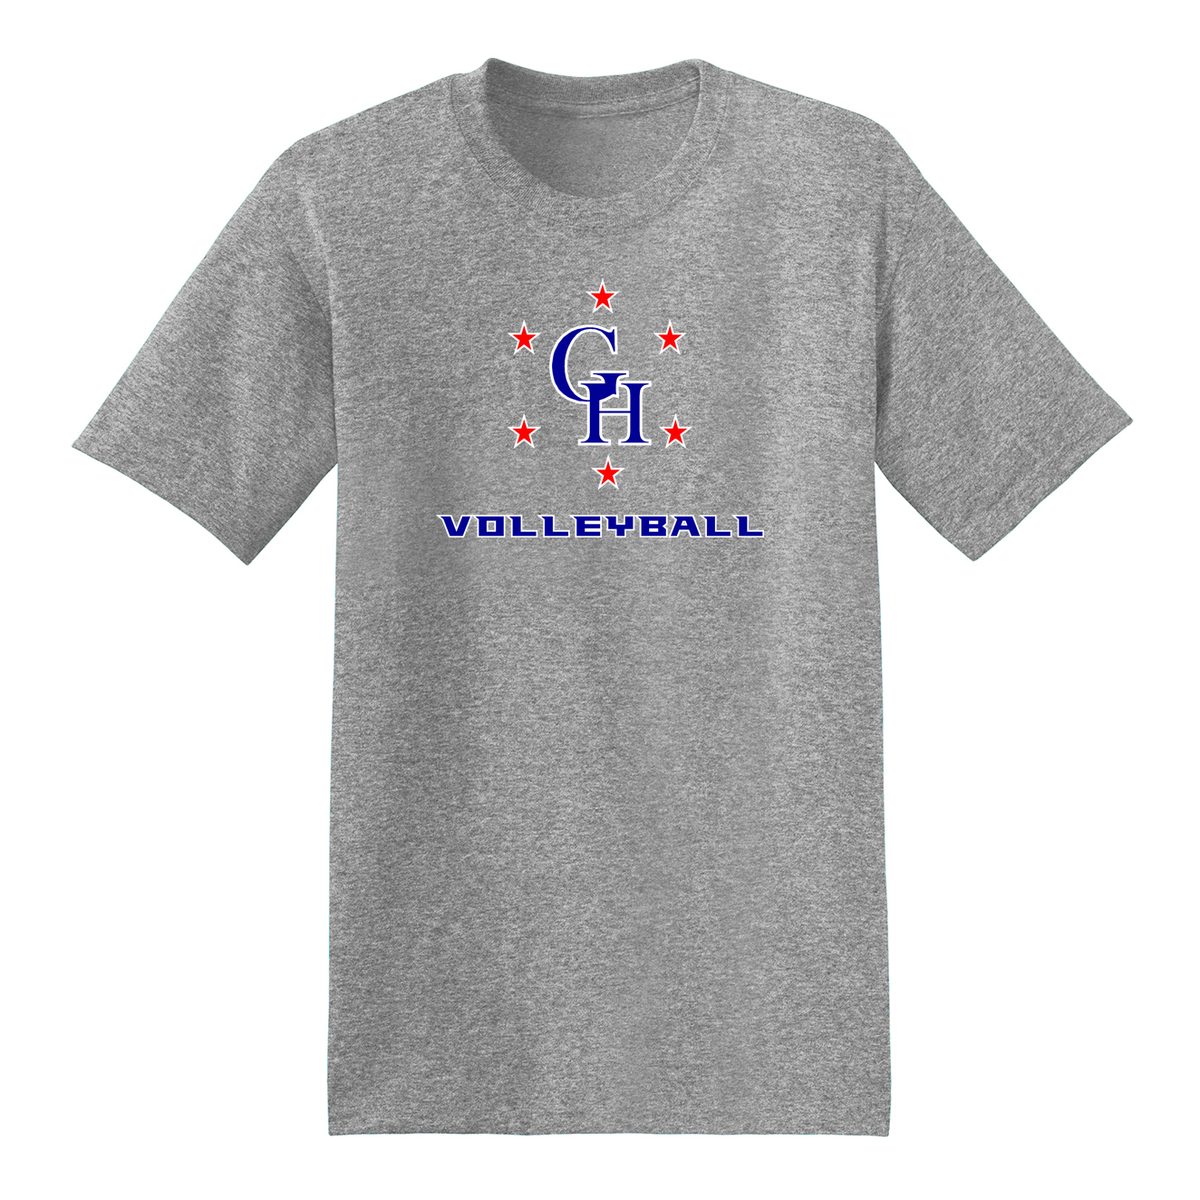 Great Hollow Volleyball T-Shirt